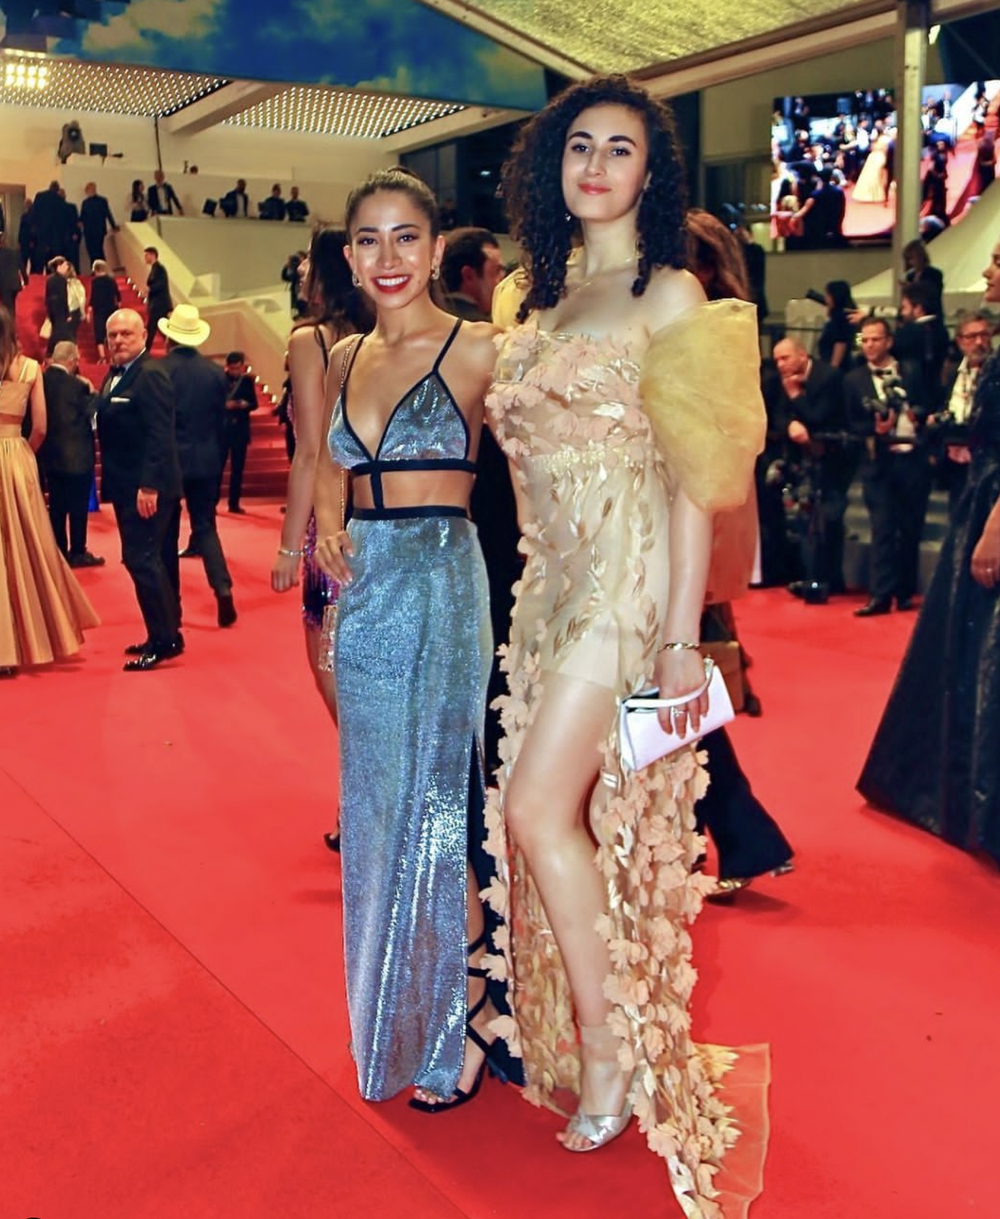 Maya Moravec and Izzie Nadah pose on the red carpet at the 2022 Cannes Film Festival